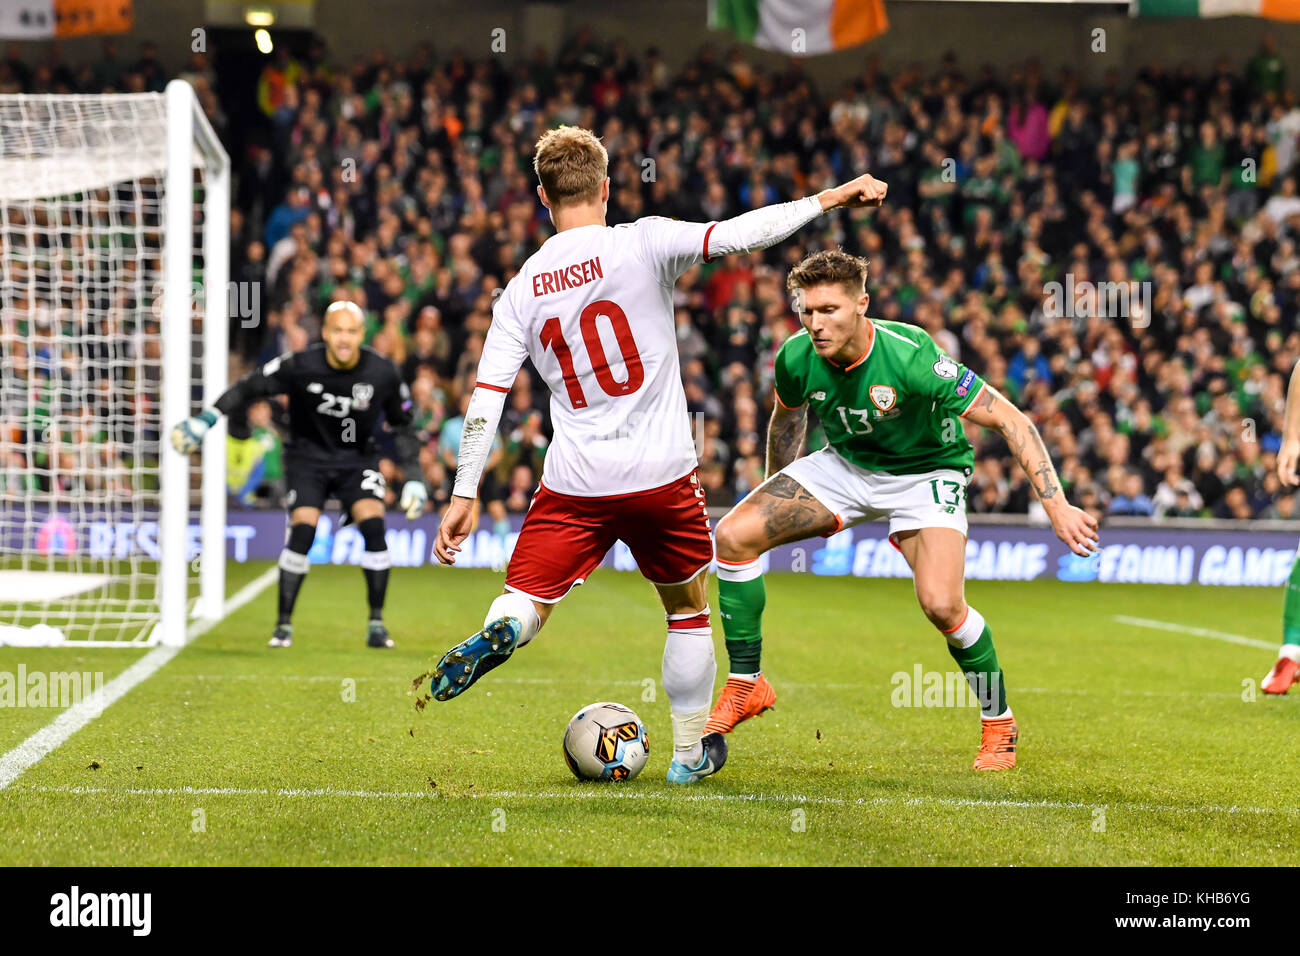 Dublin, Ireland. 14th Nov, 2017. Christian Eriksen crosses the ball during  the FIFA World Cup 2018 qualification Play off football match between  Republic of Ireland and Denmark at the Aviva Stadium in